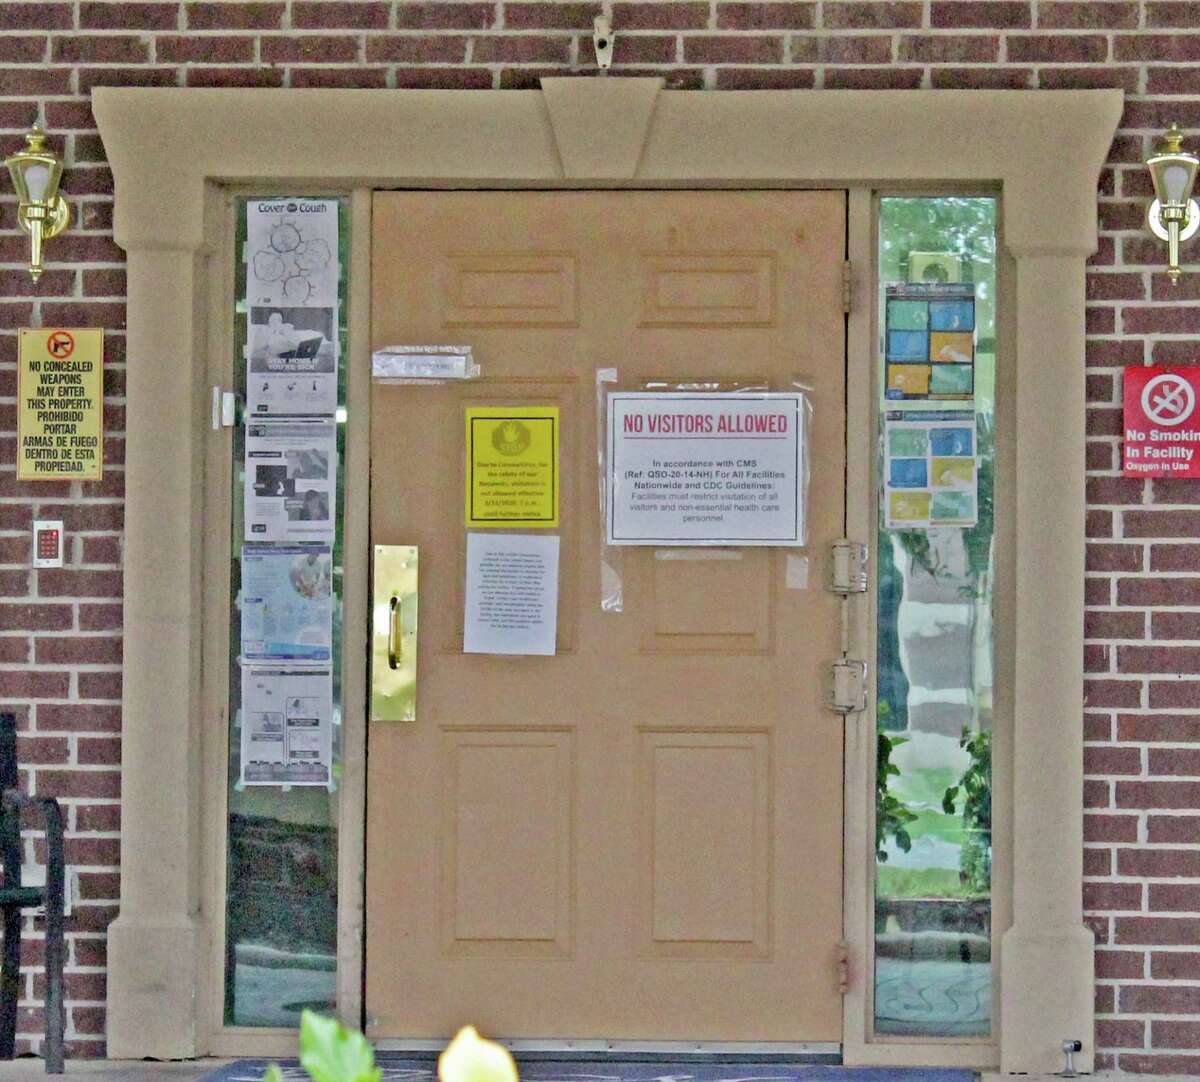 The front door of a Missouri City nursing home alerts visitors that no outsiders are allowed due to the COVID-19 health crisis.